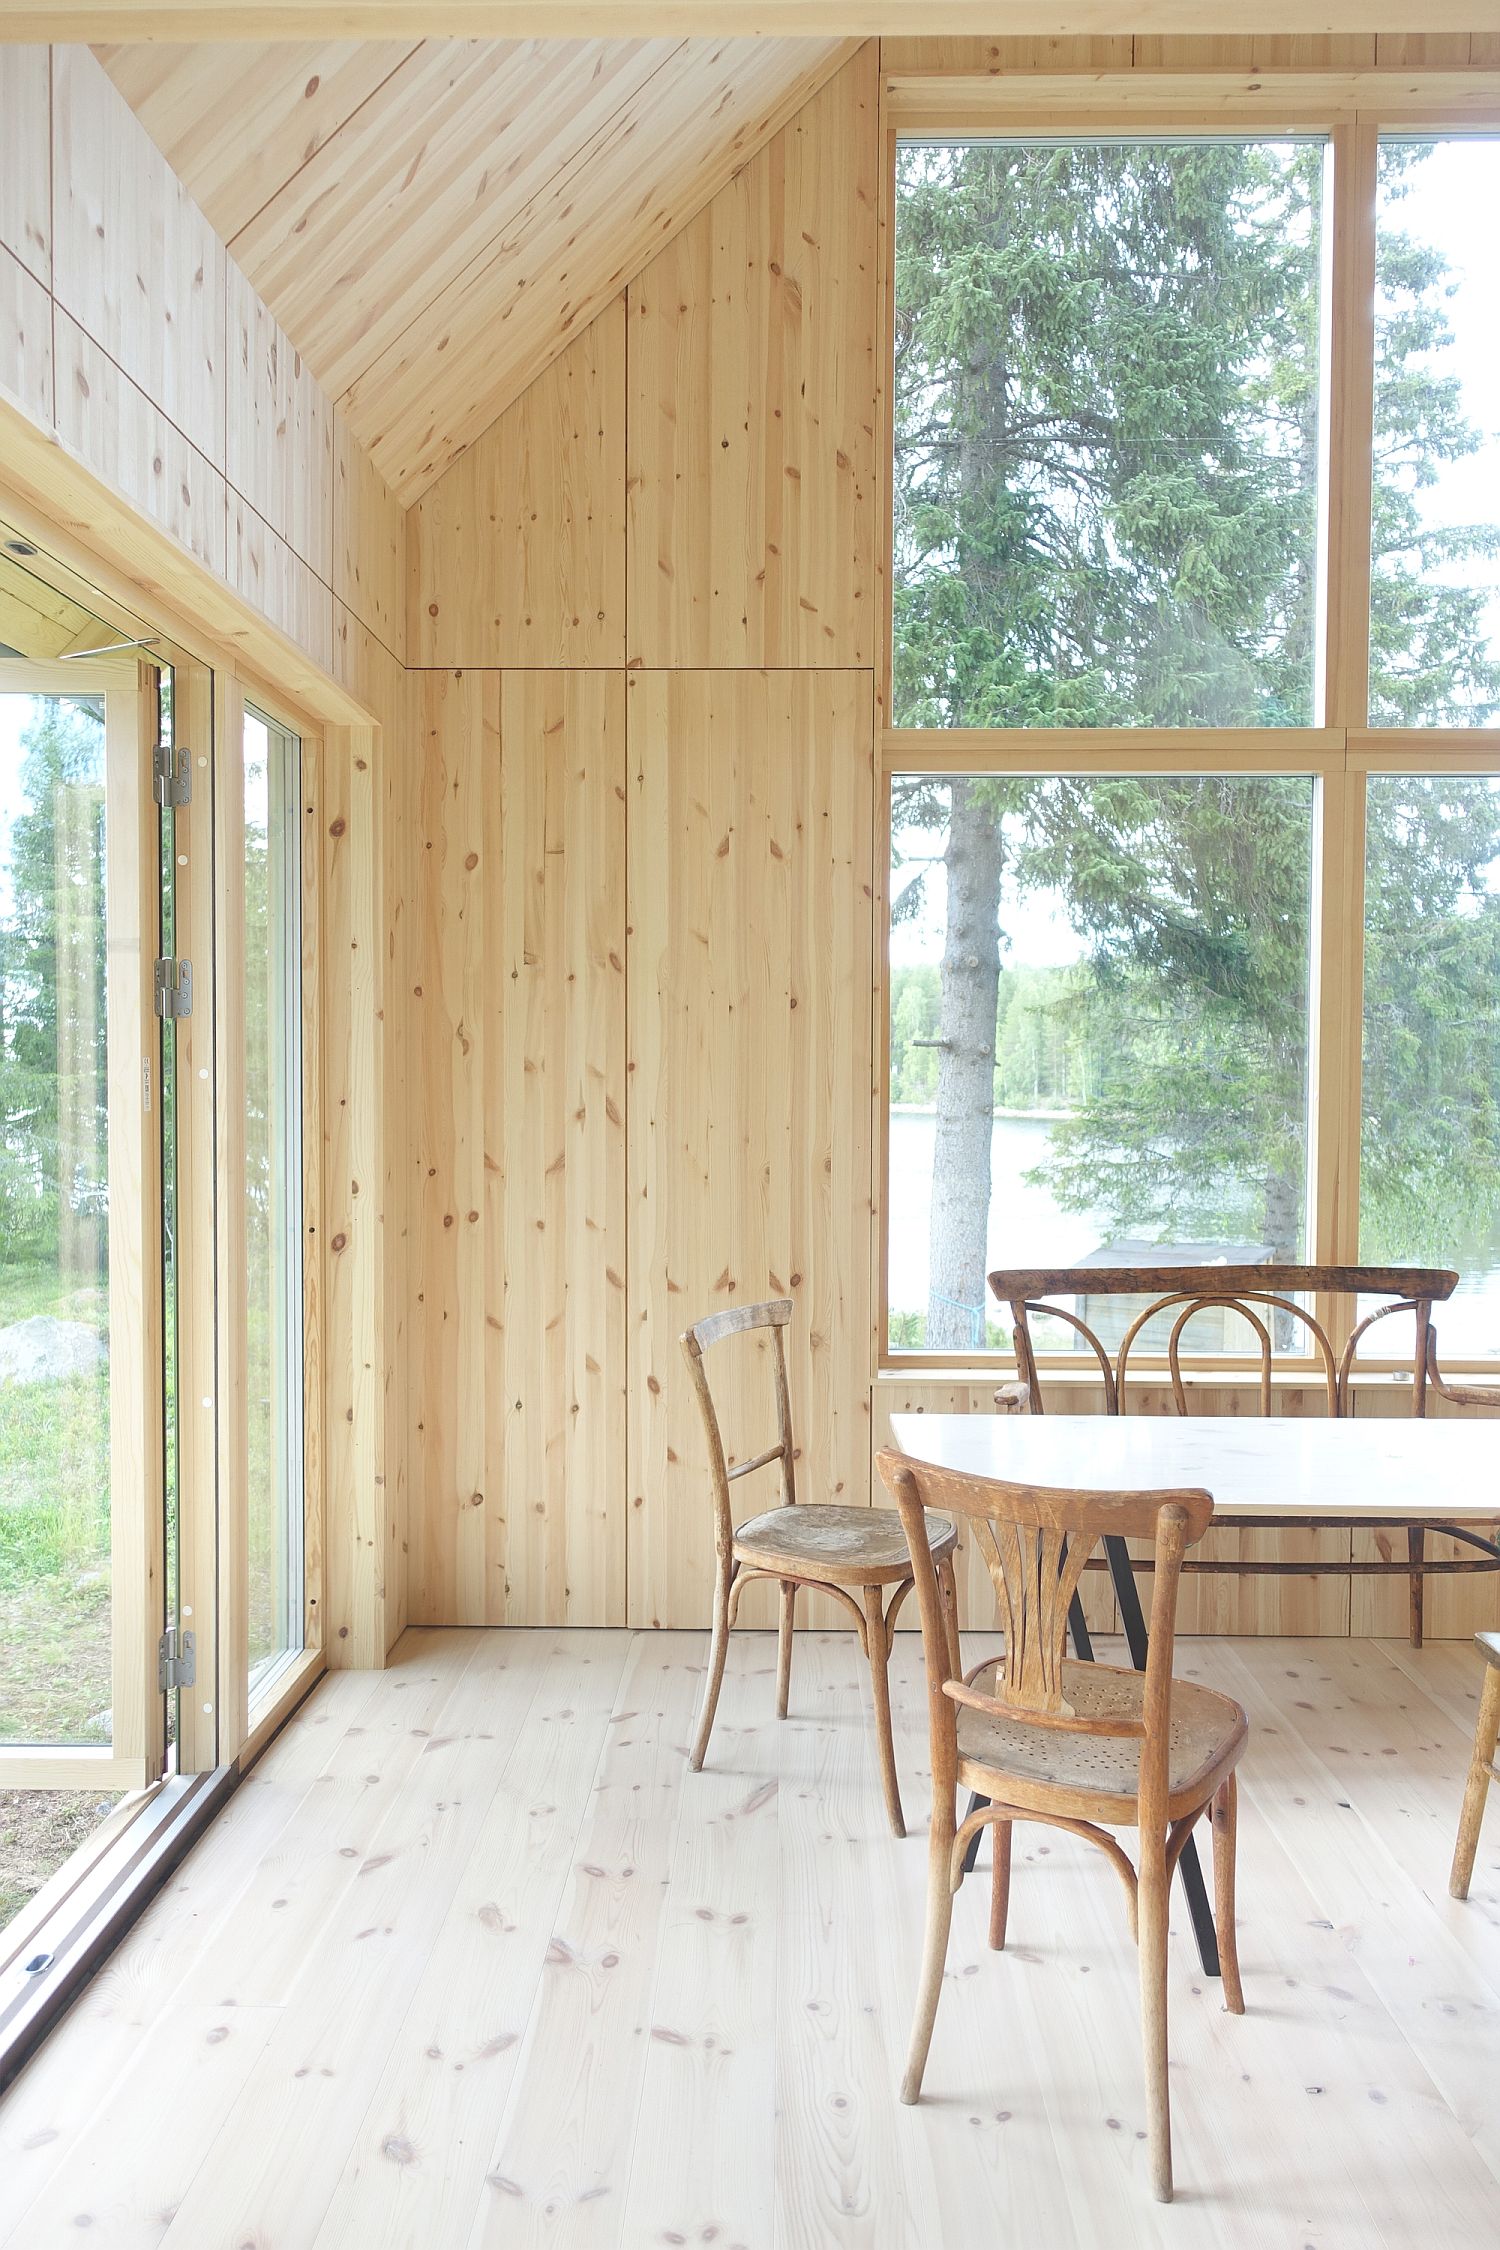 Woodsy-and-Scandinavian-style-interior-of-the-stylish-Sweden-summer-cabin